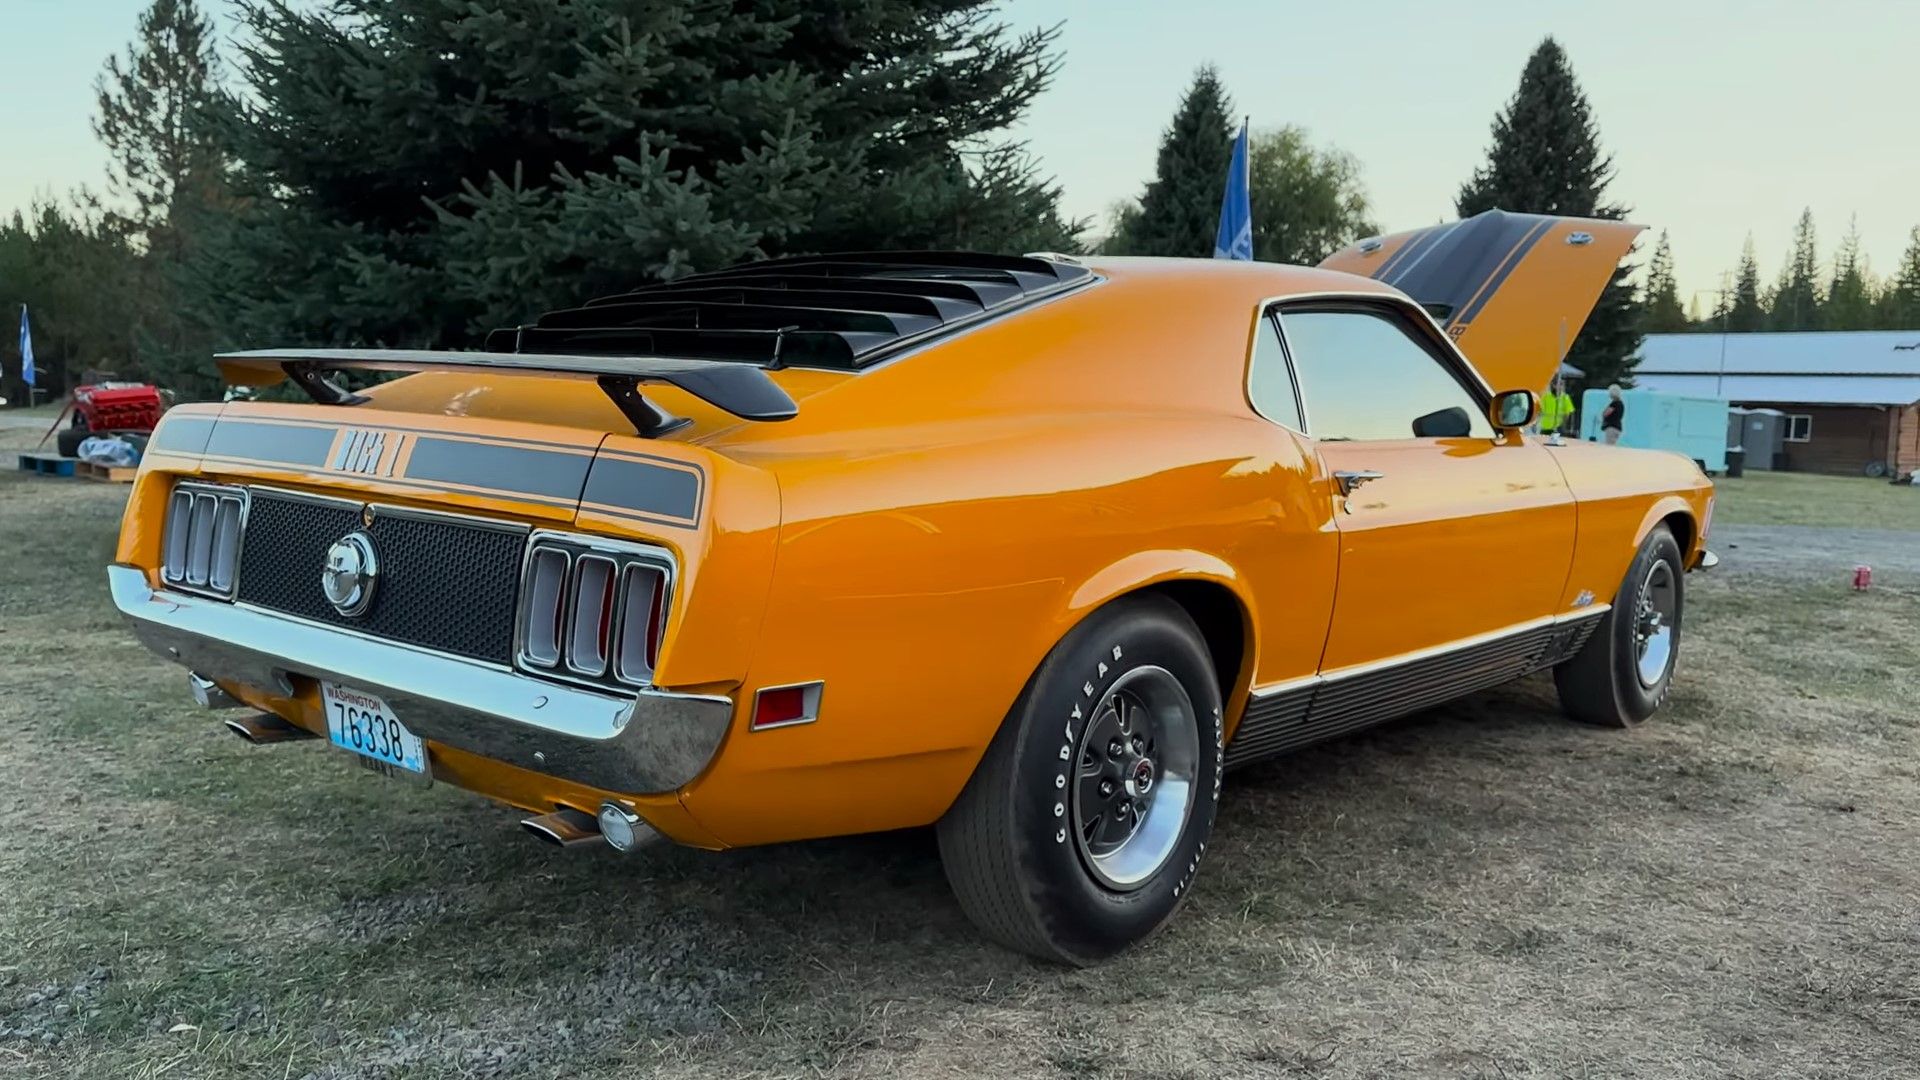 The 1970 Ford Mustang Mach One 428 Cobra Jet That Will Make Your Heart Race